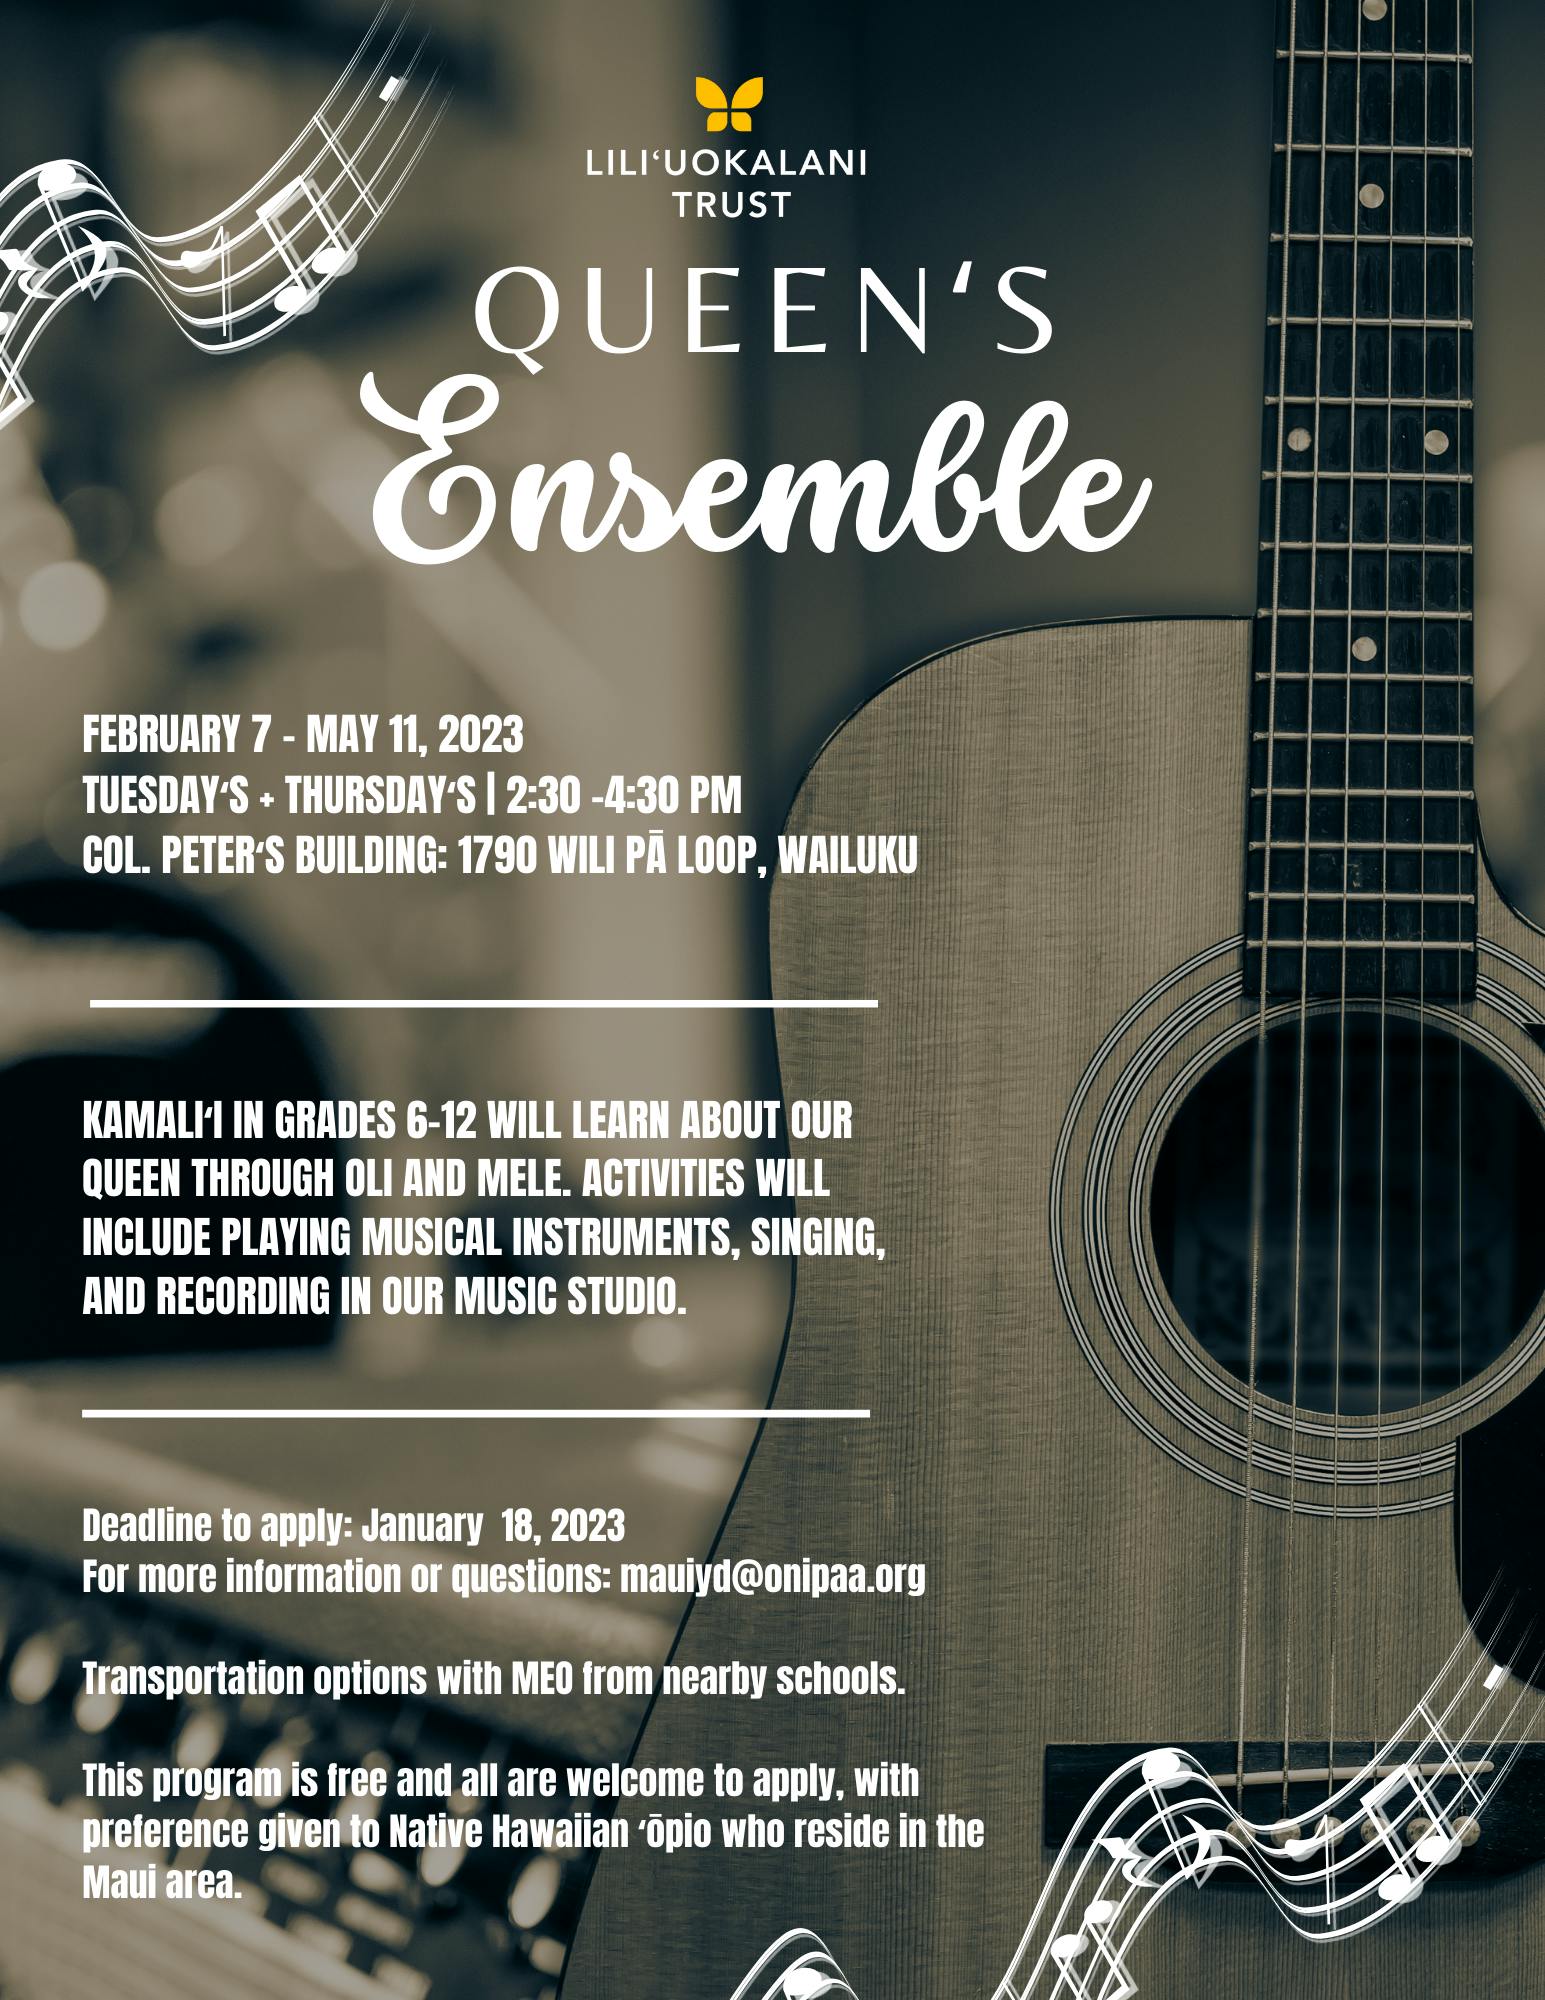 A poster for Queenʻs Ensemble, a program for youth on Maui to learn about Queen Liliʻuokalani through oli and mele.